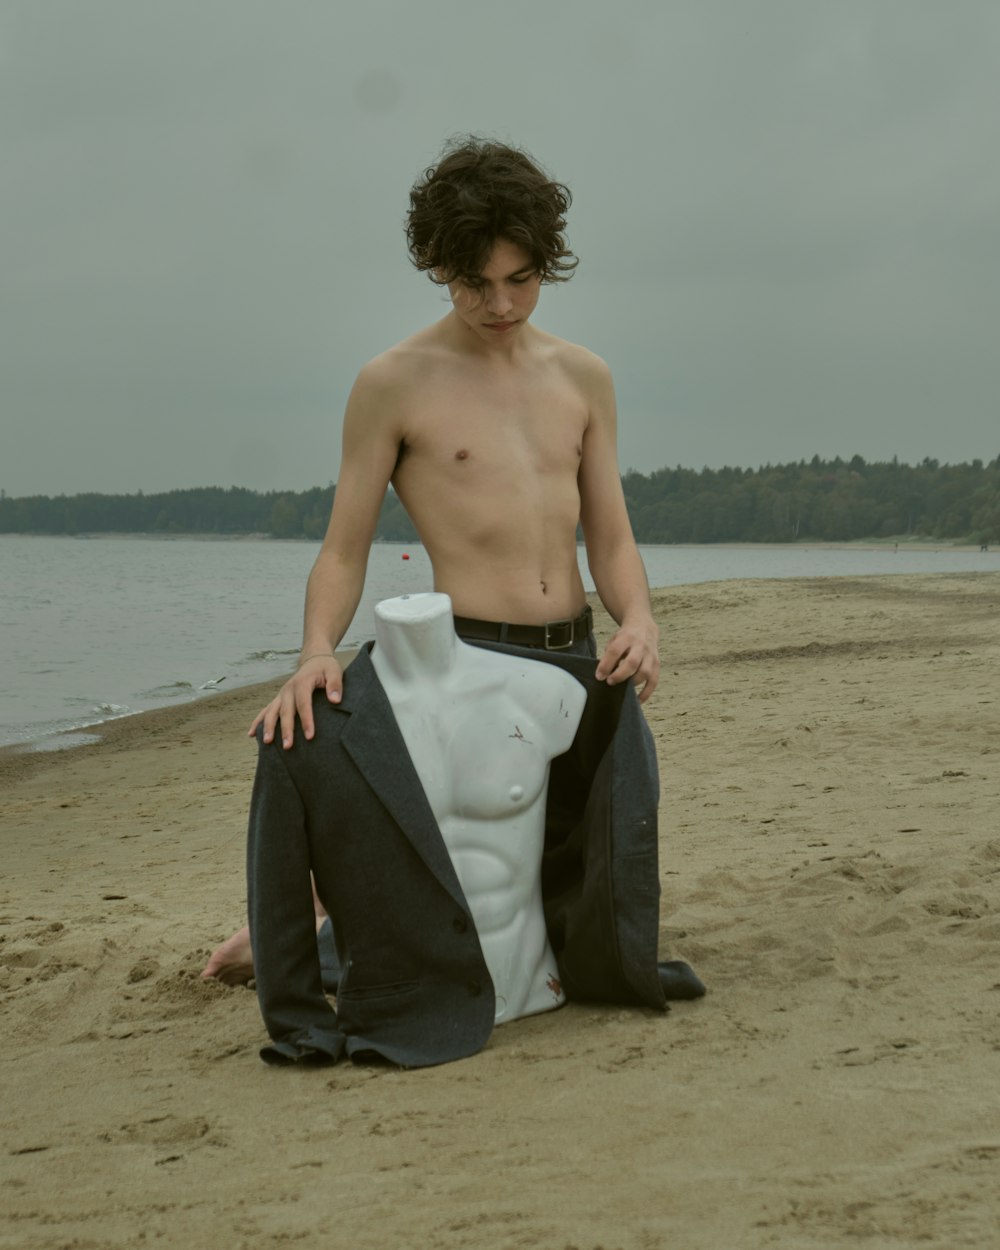 a shirtless man sitting on a beach next to a body of water